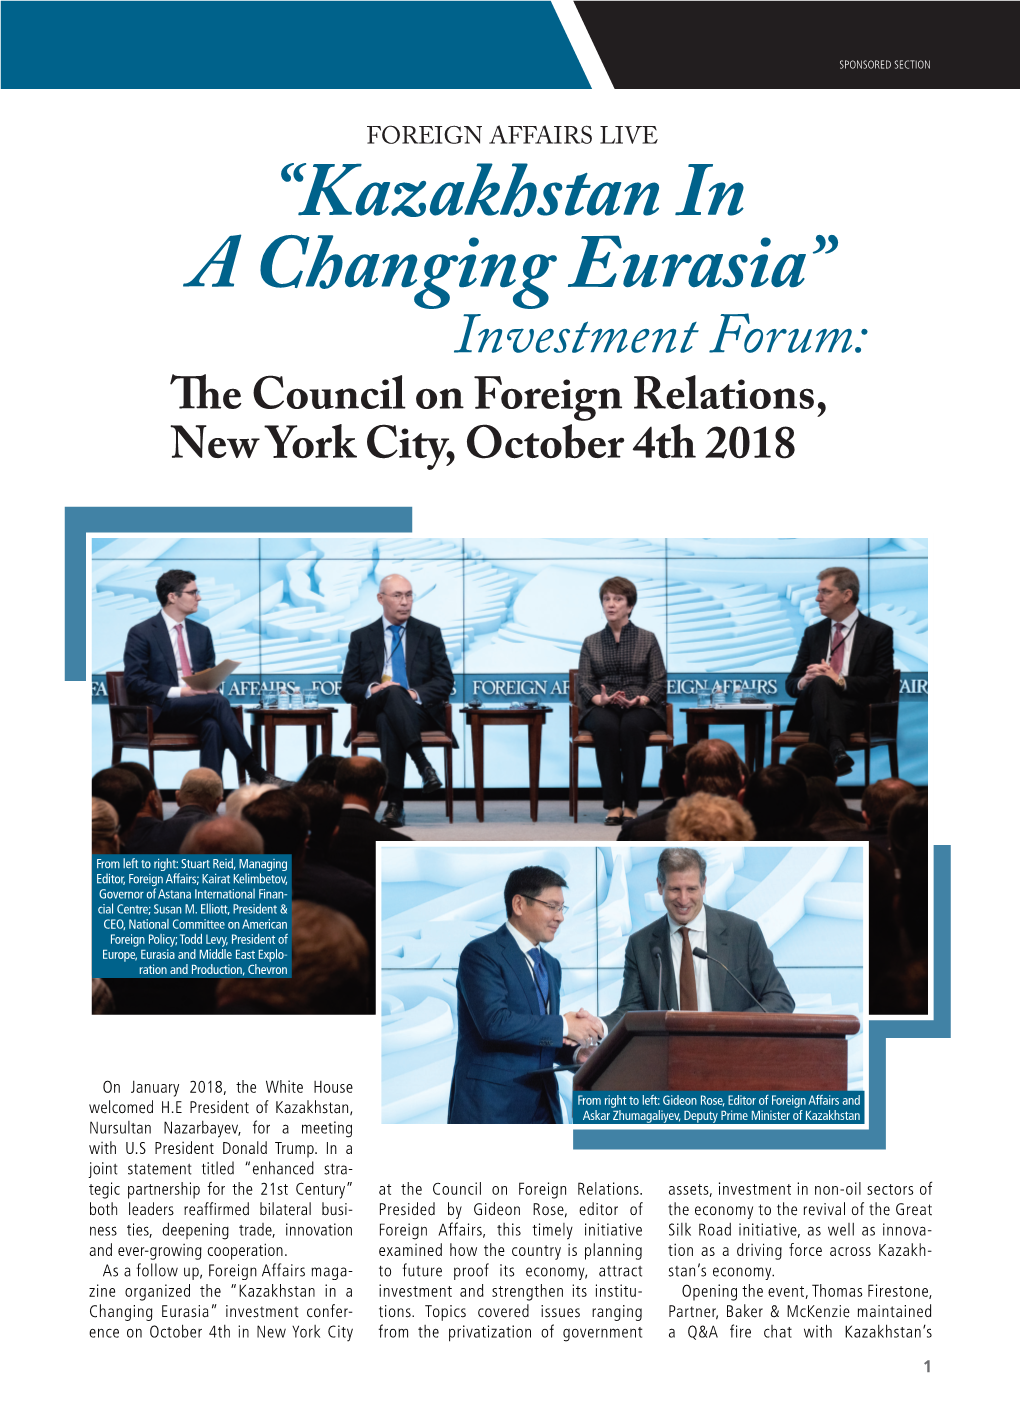 “Kazakhstan in a Changing Eurasia” Investment Forum: the Council on Foreign Relations, New York City, October 4Th 2018